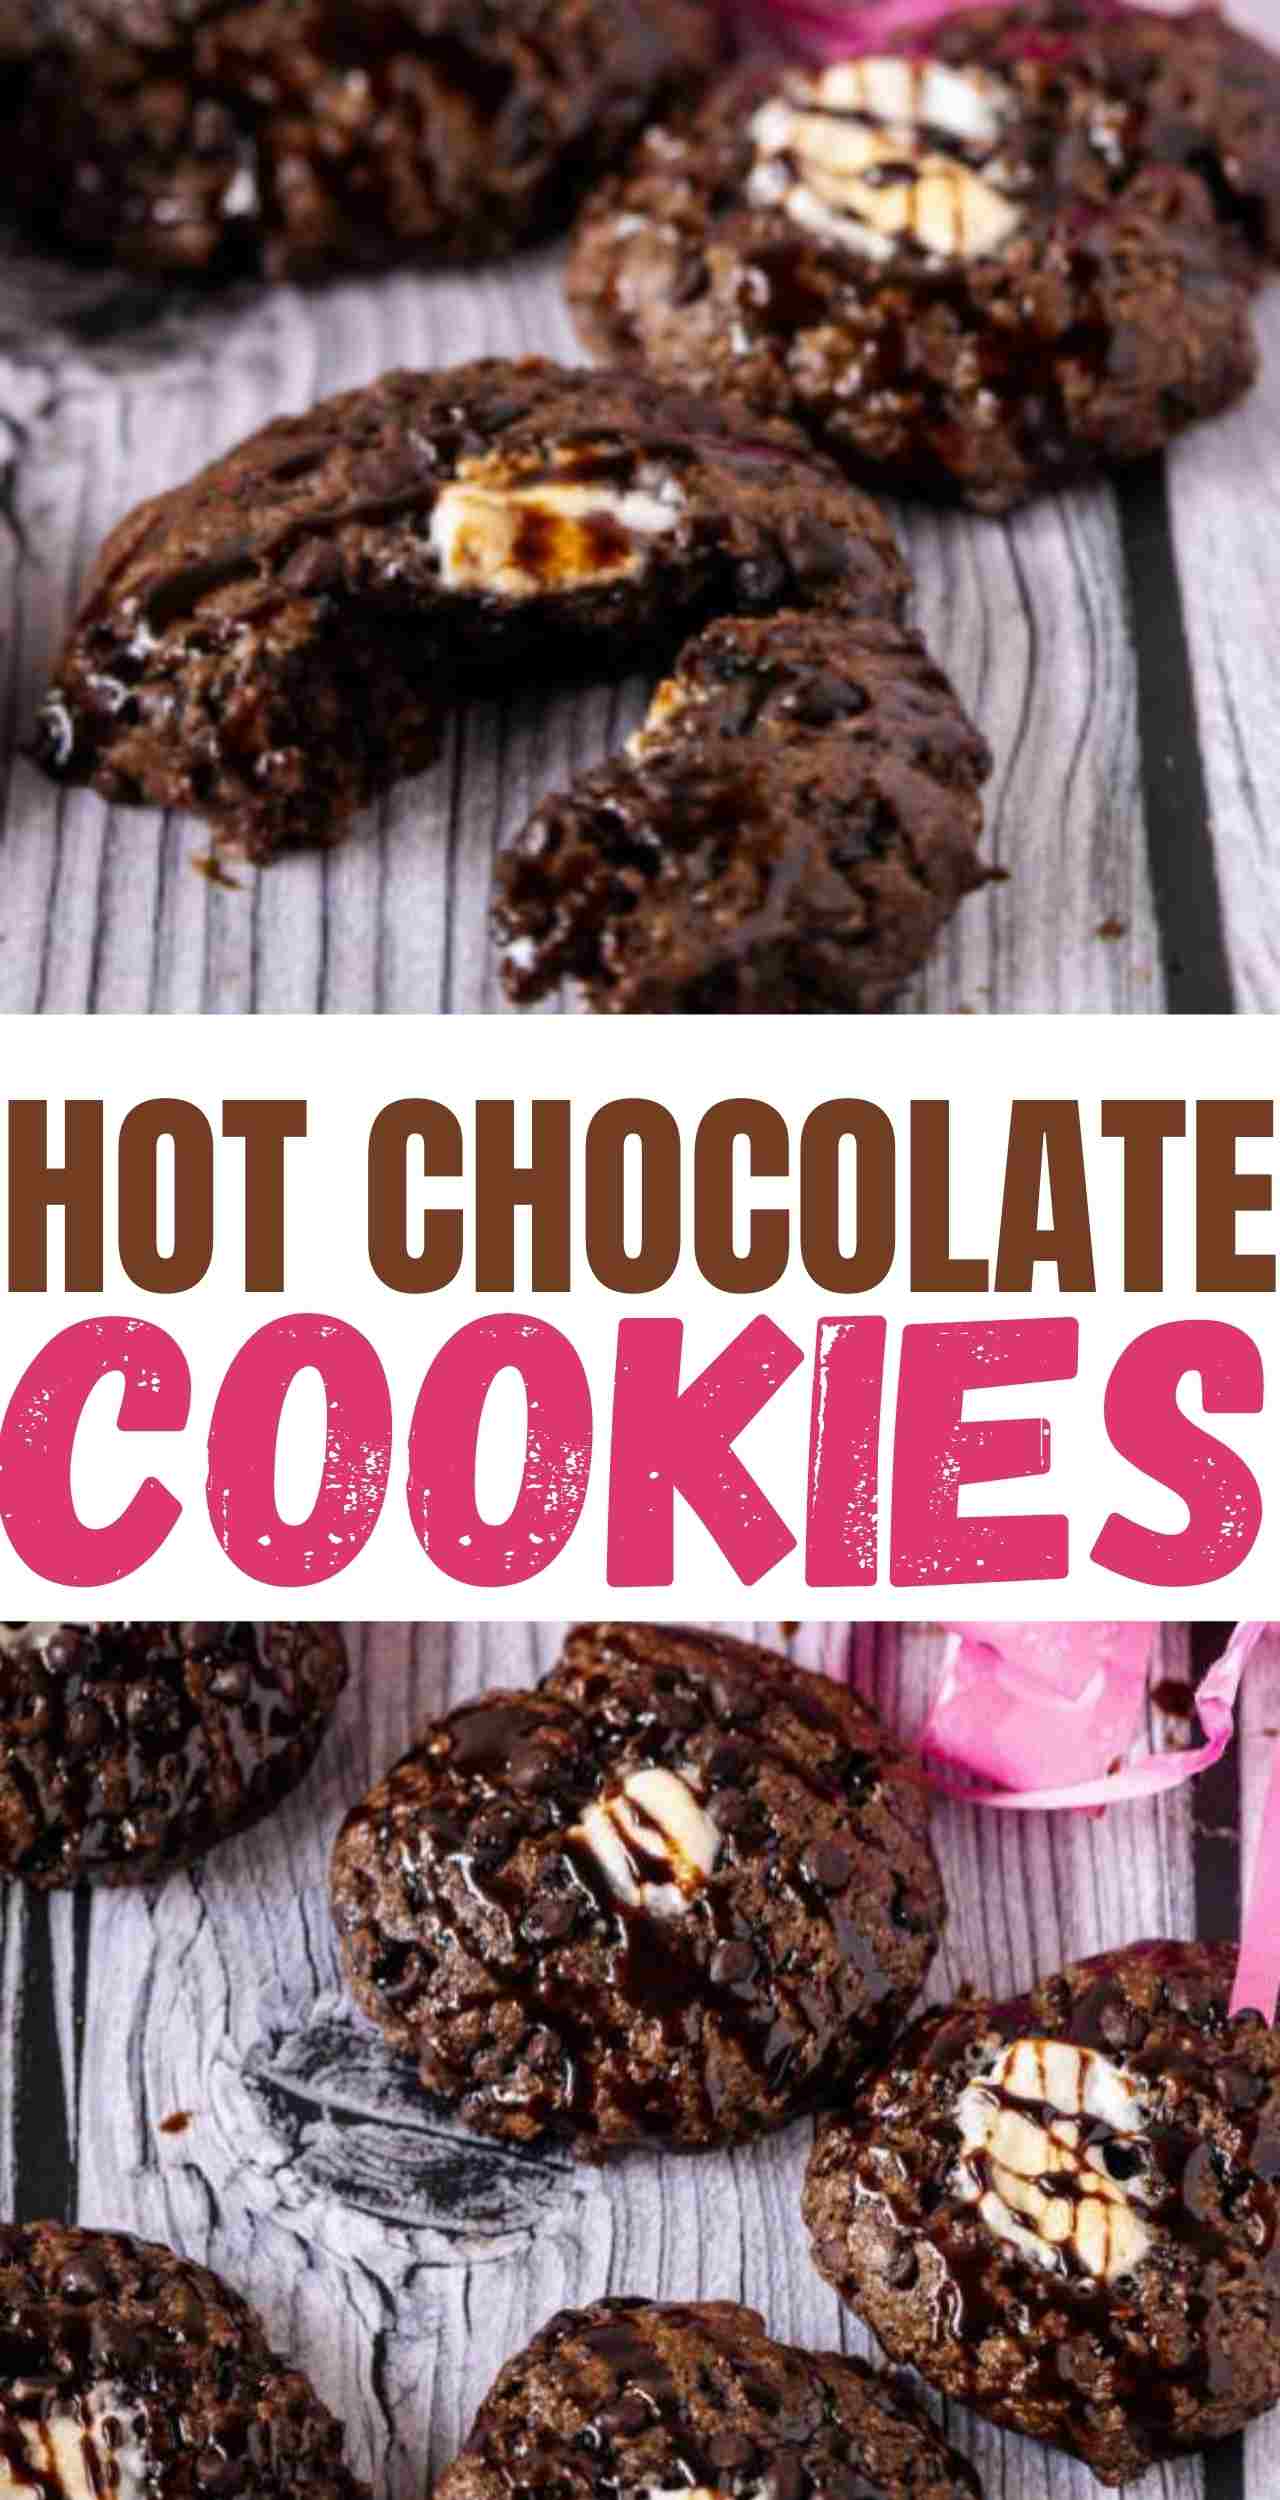 Hot Chocolate Cookies Collage image